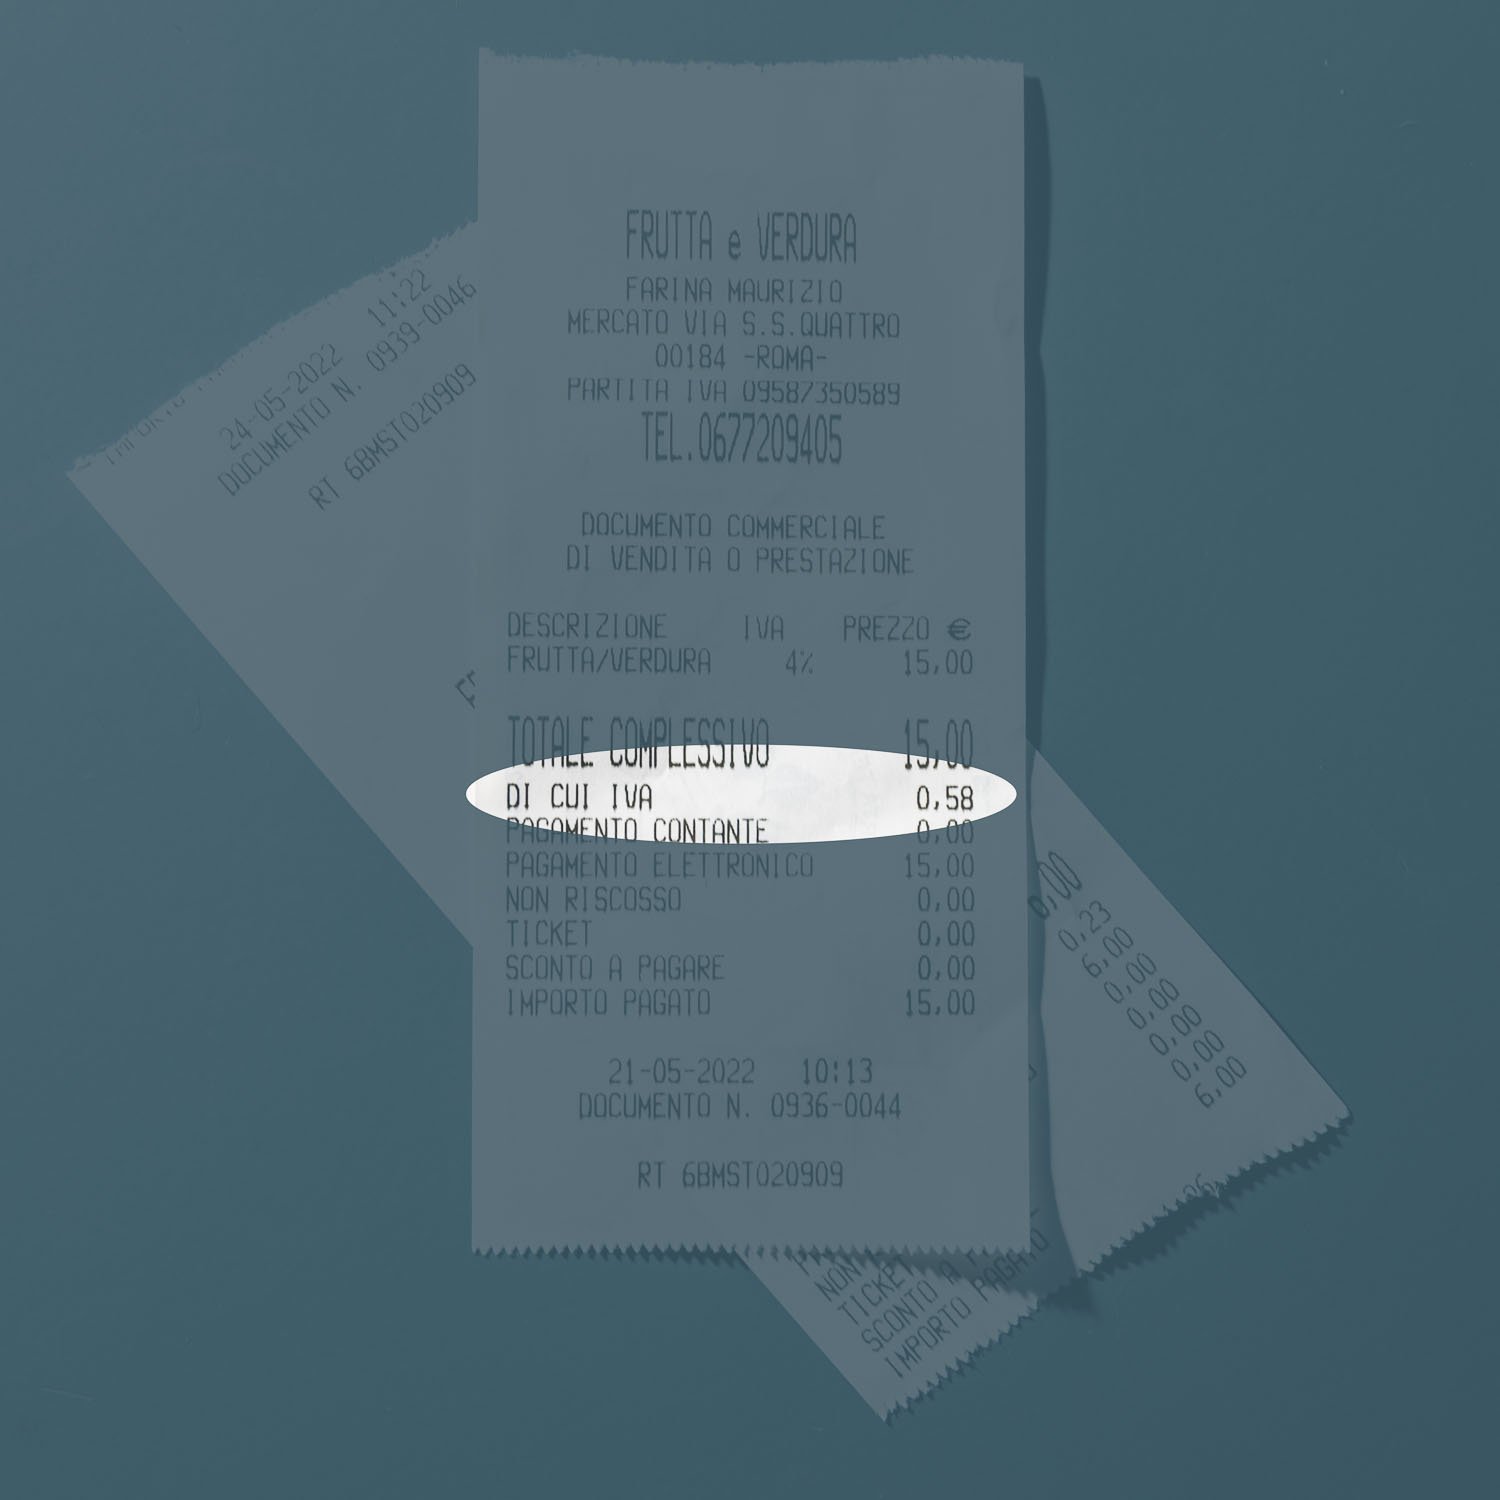 How to get VAT refund in Italy - The IVA is on Every Receipt